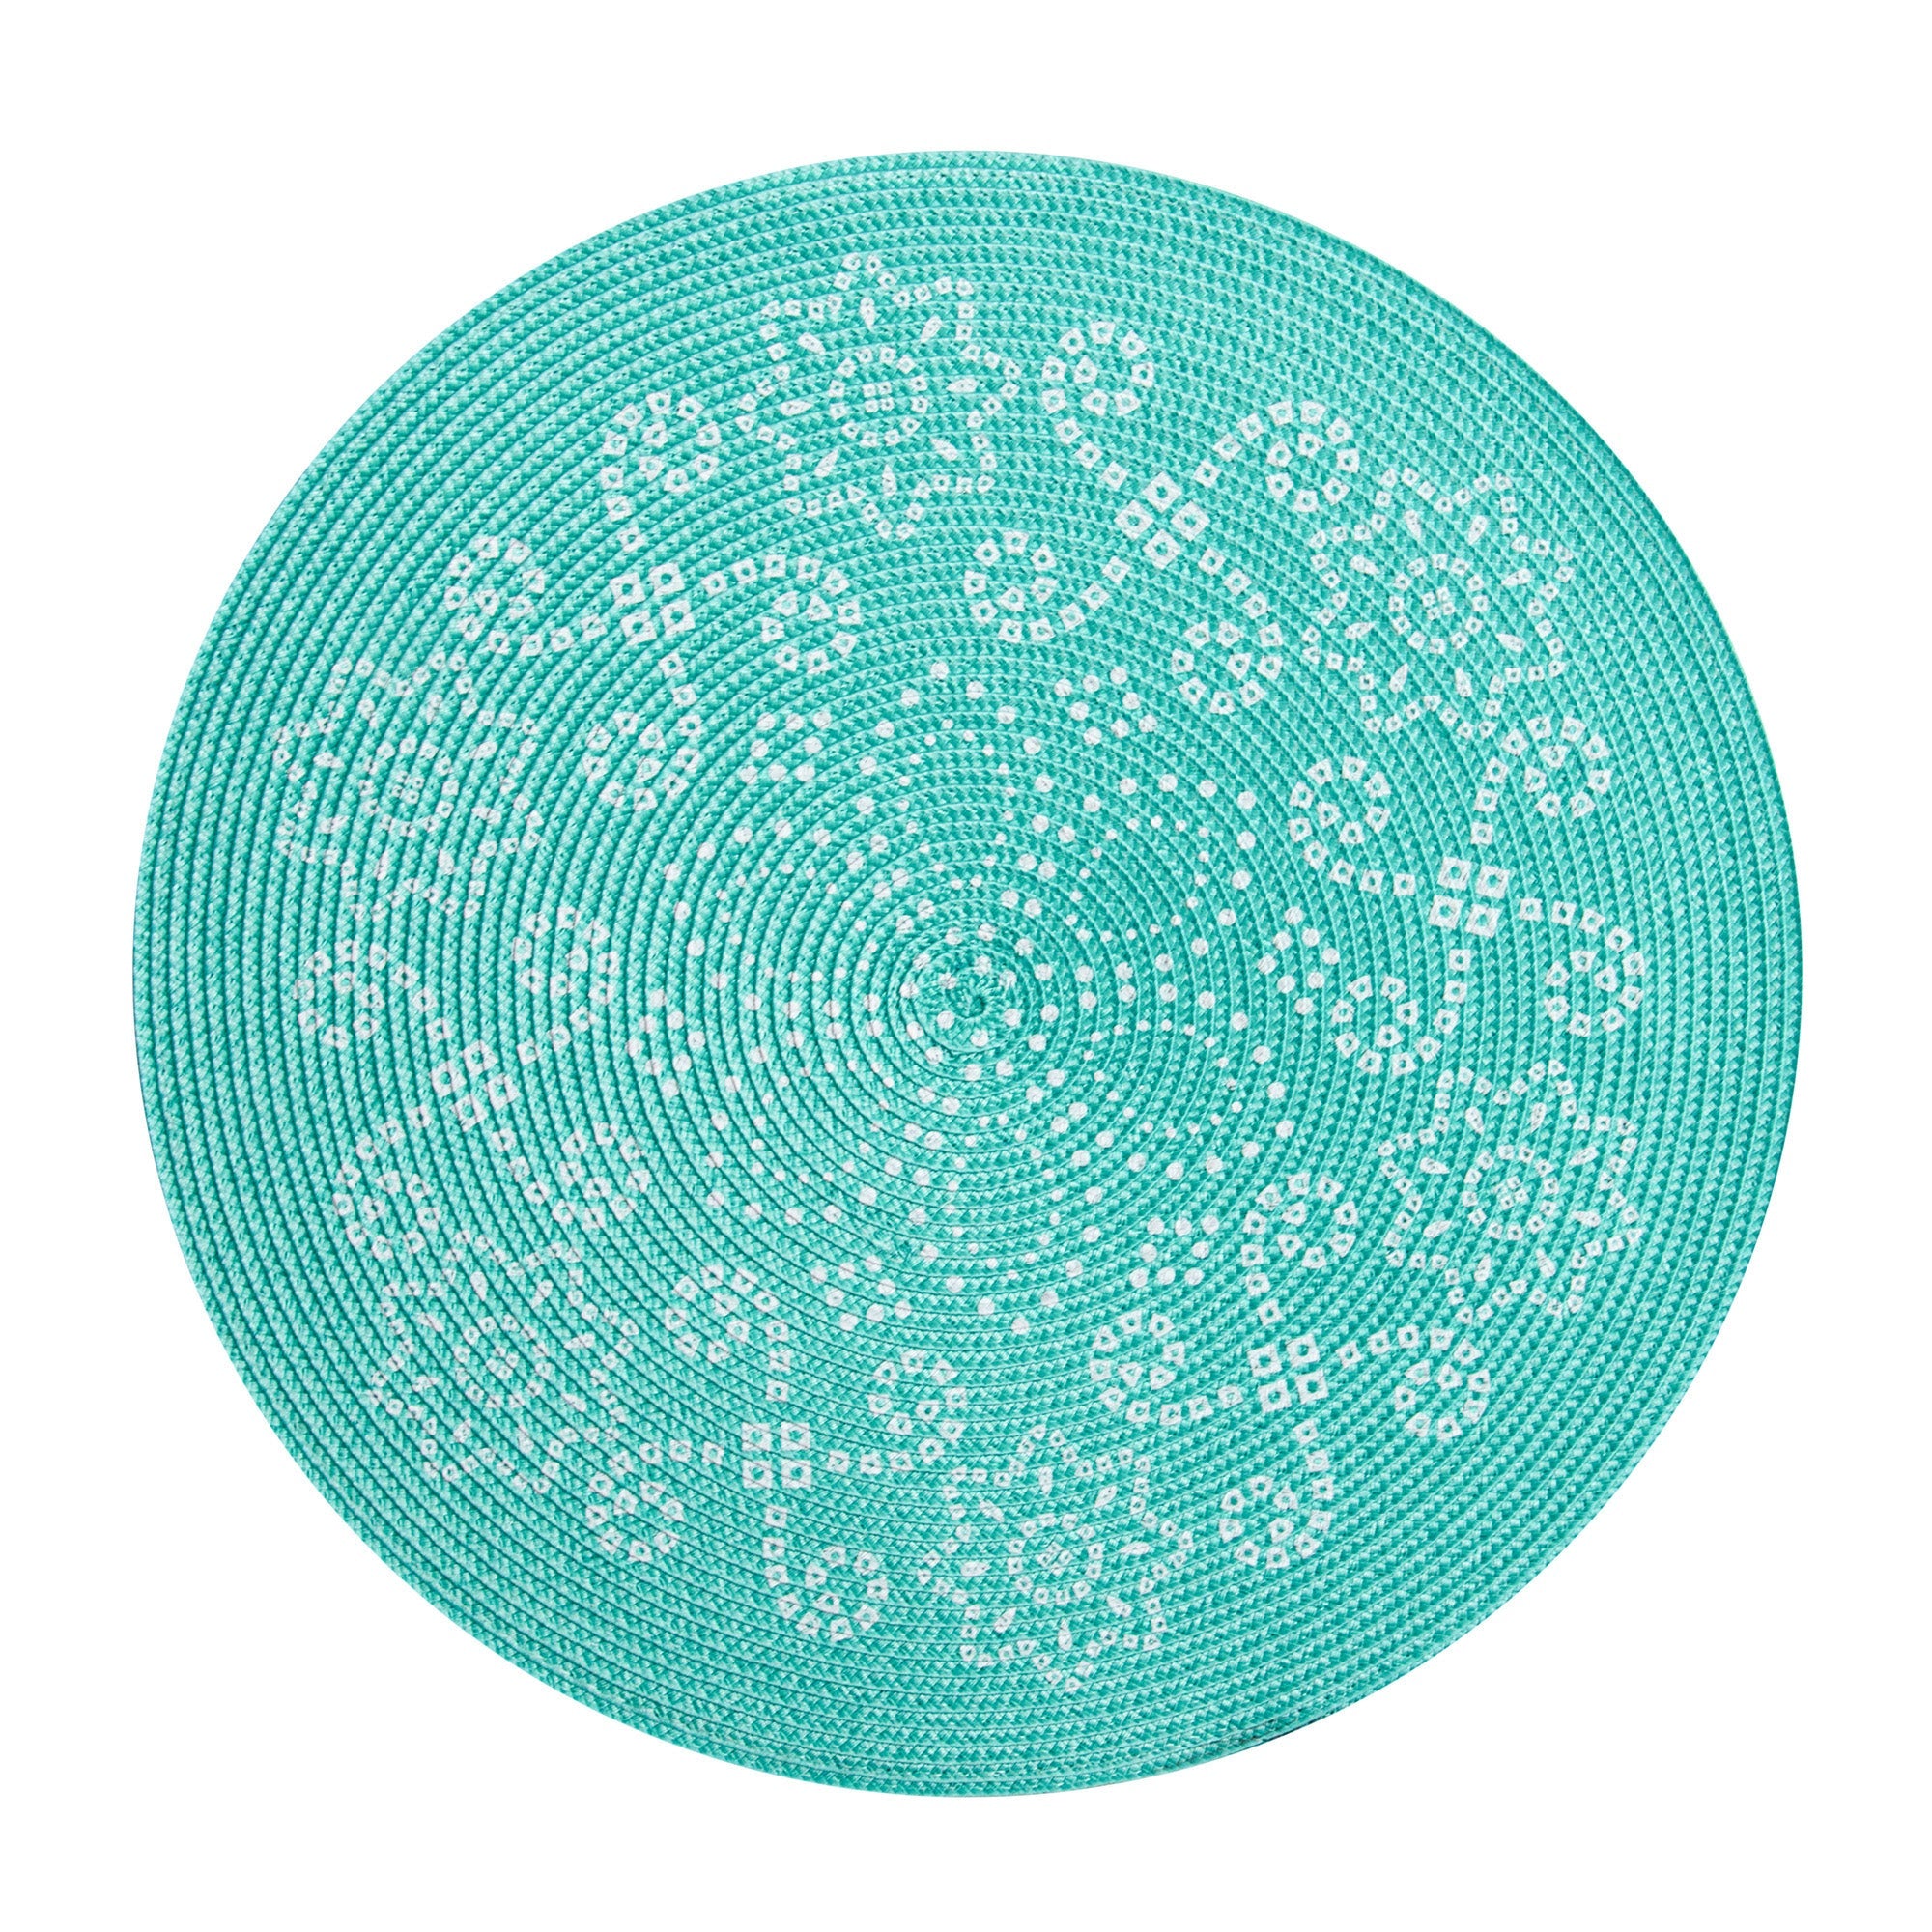 Printed Round Placemat Green 100% Polypropylene 15in dia.  38cm dia.